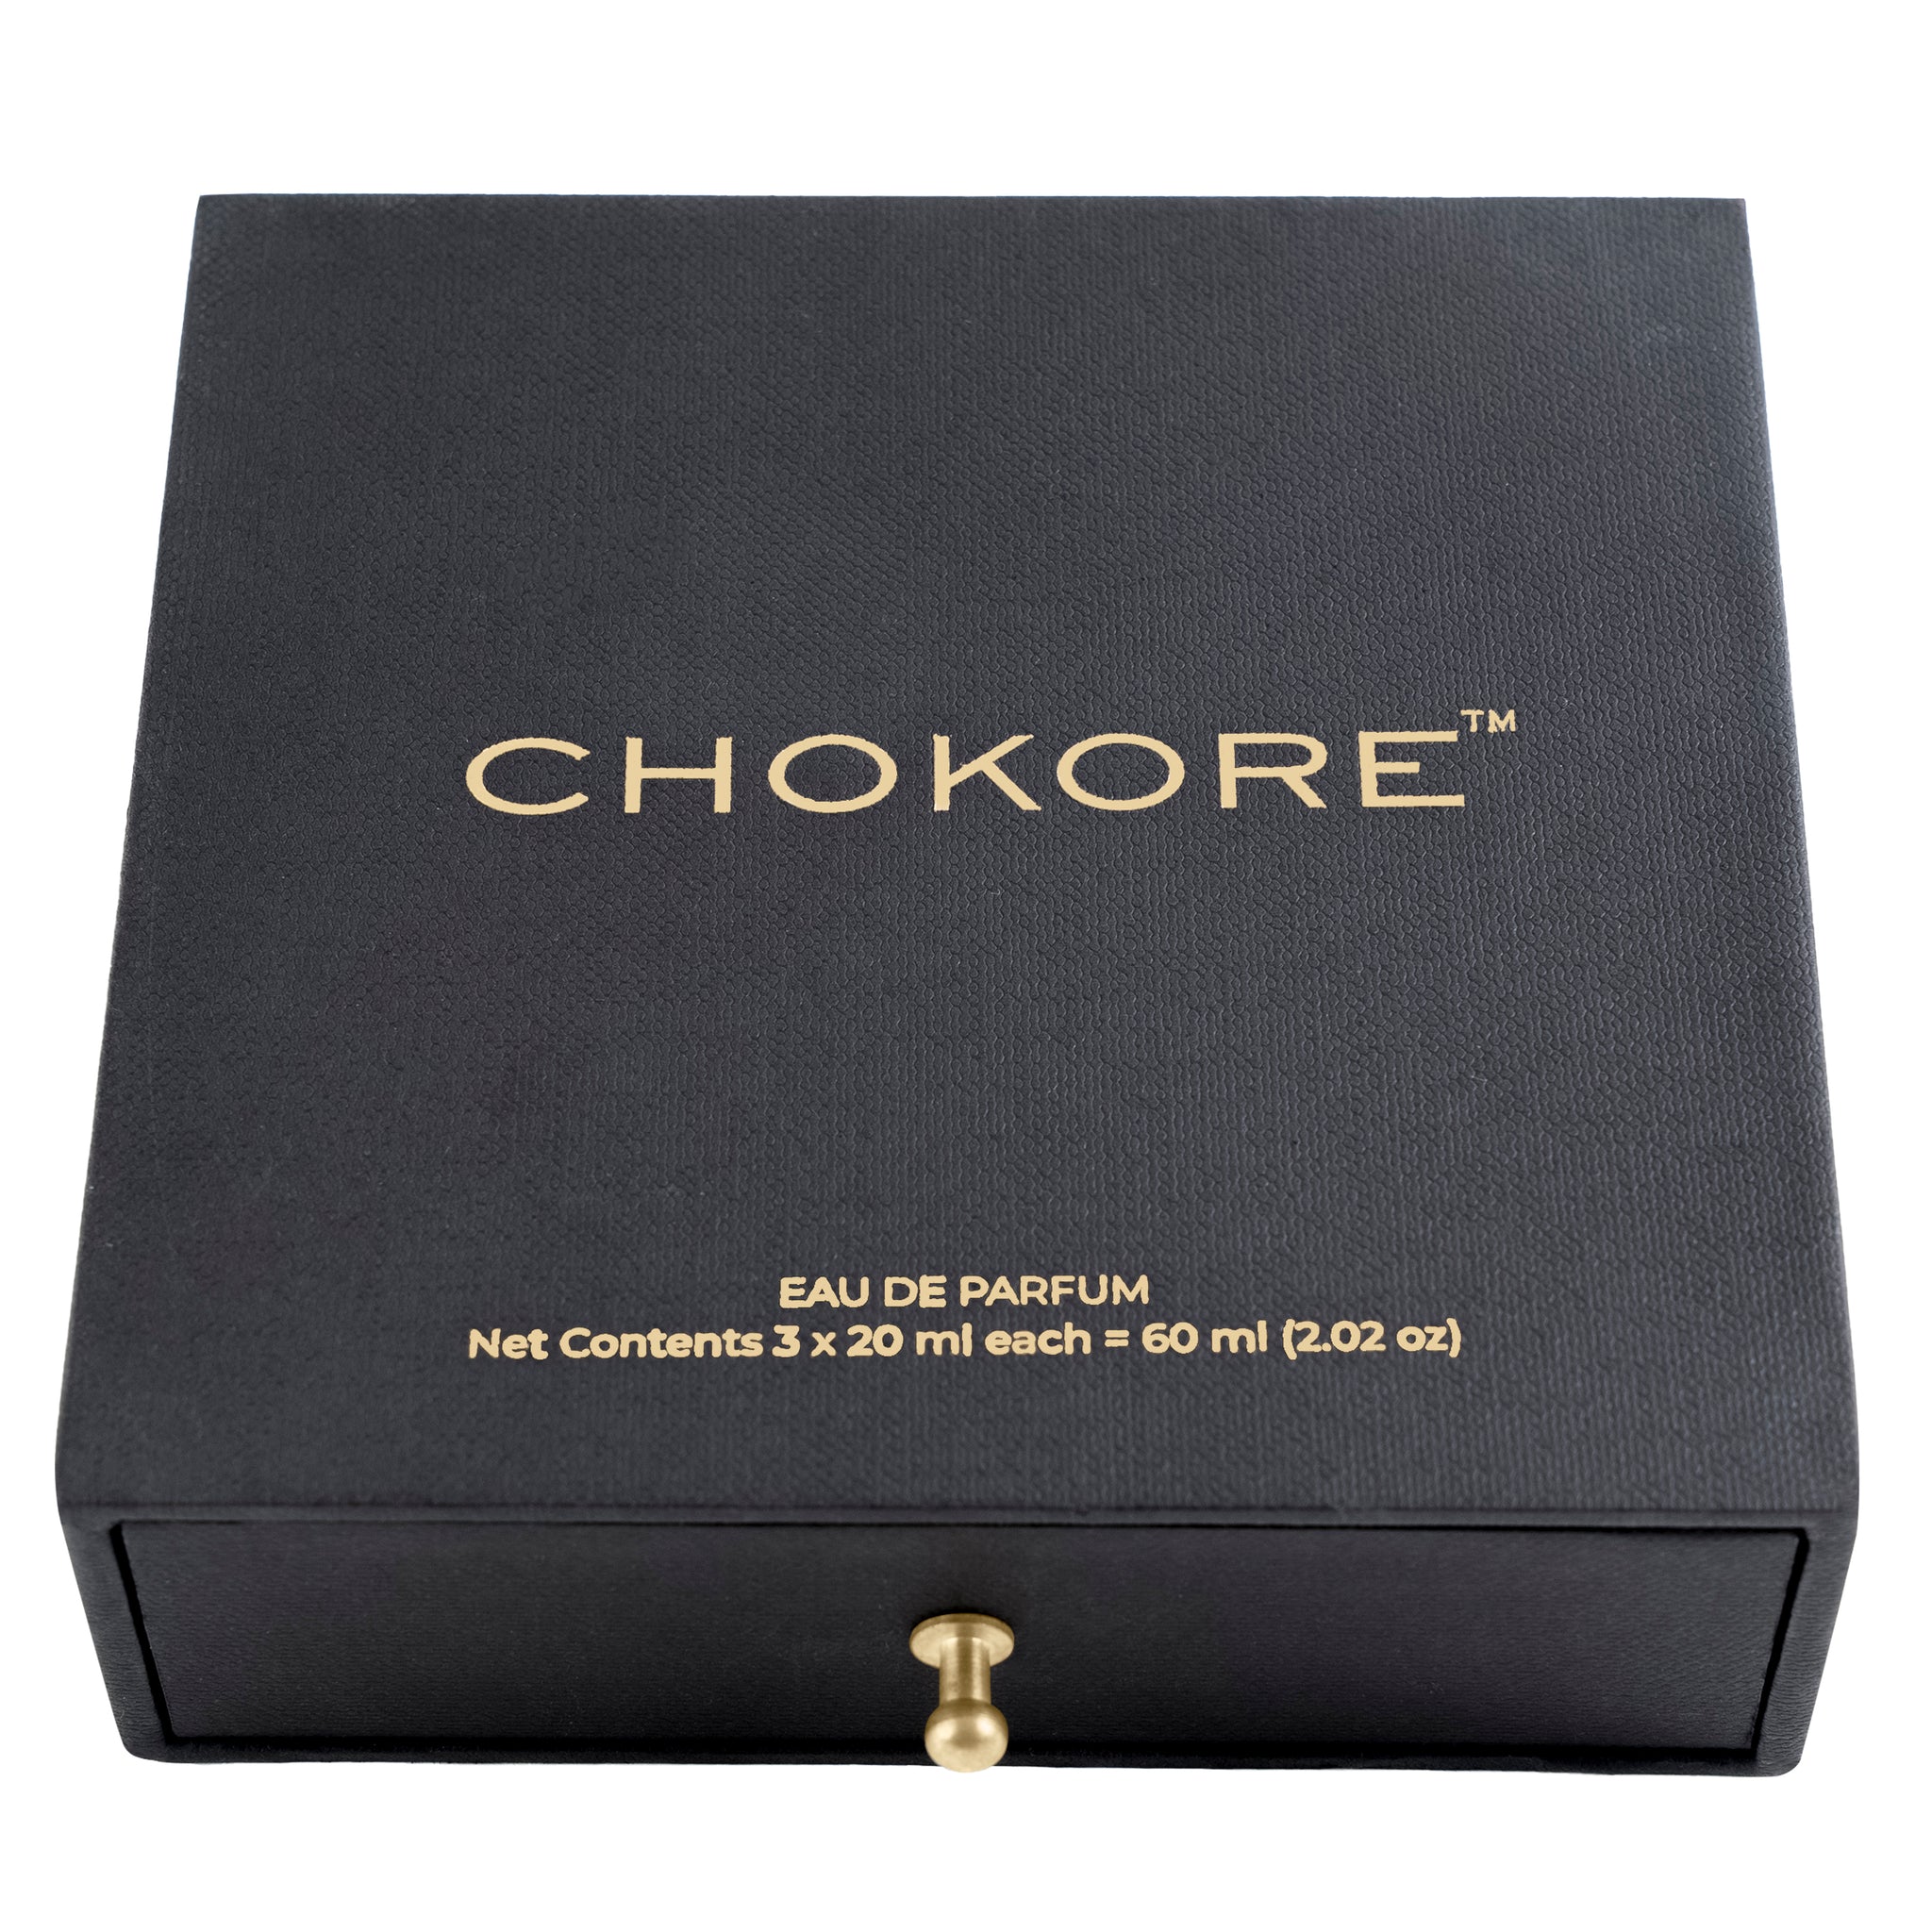 Chokore Perfume Combo Pack of 3 Only For Men (Oudacious, Zephyr, & Connection) | 3 x 20 ml